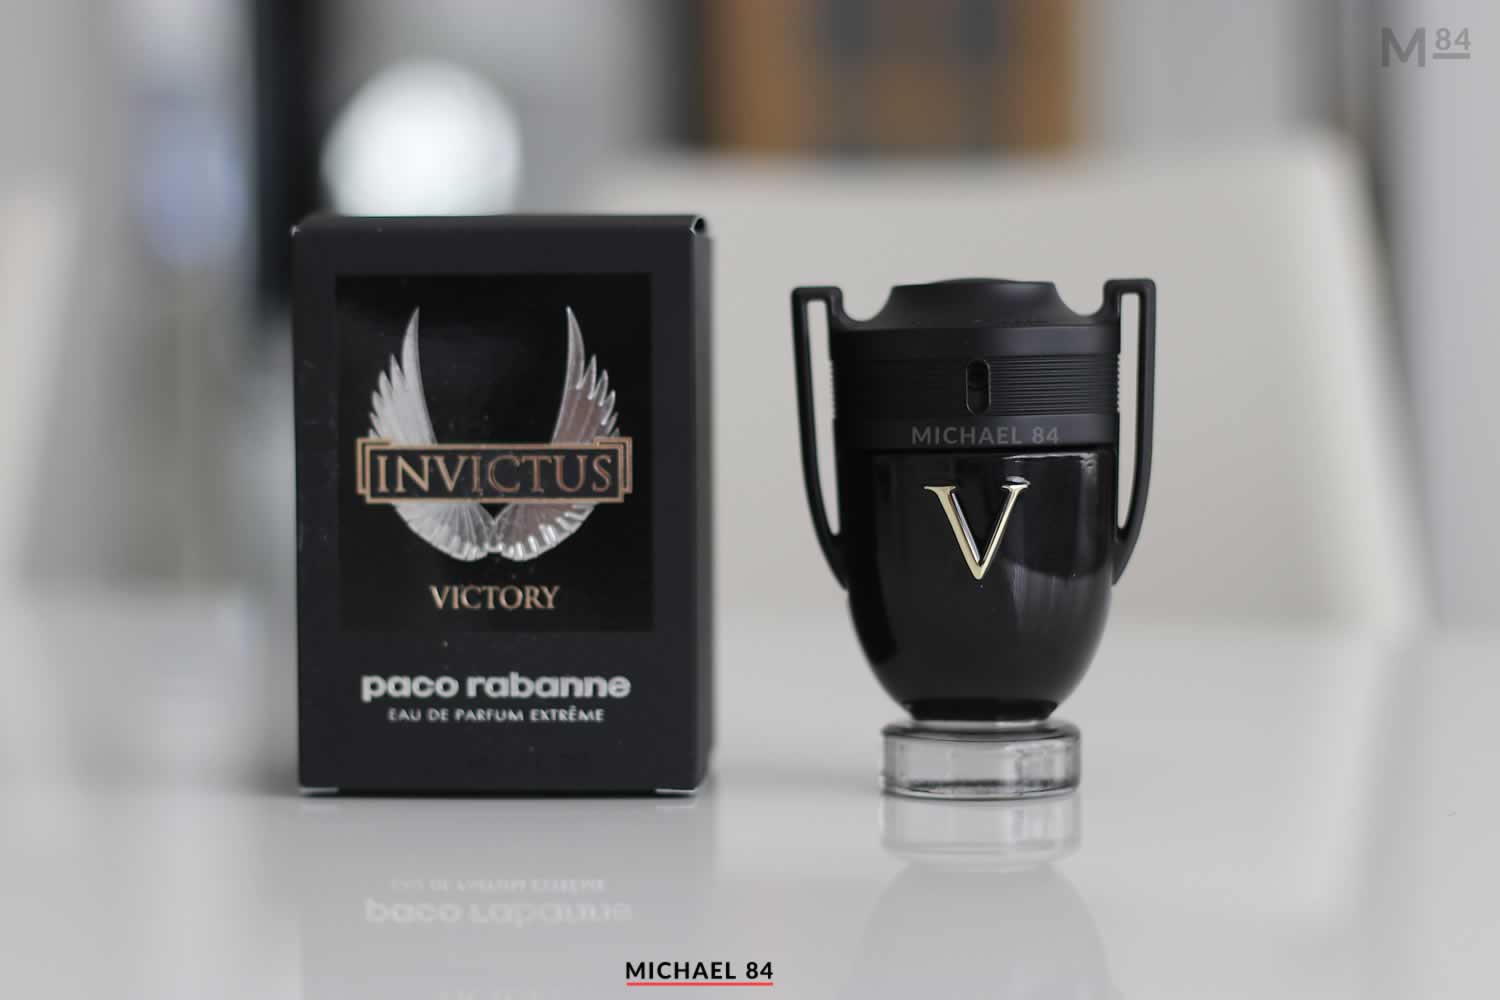 Paco Rabanne Invictus Victory Fragrance Review - Here's What It Smells ...